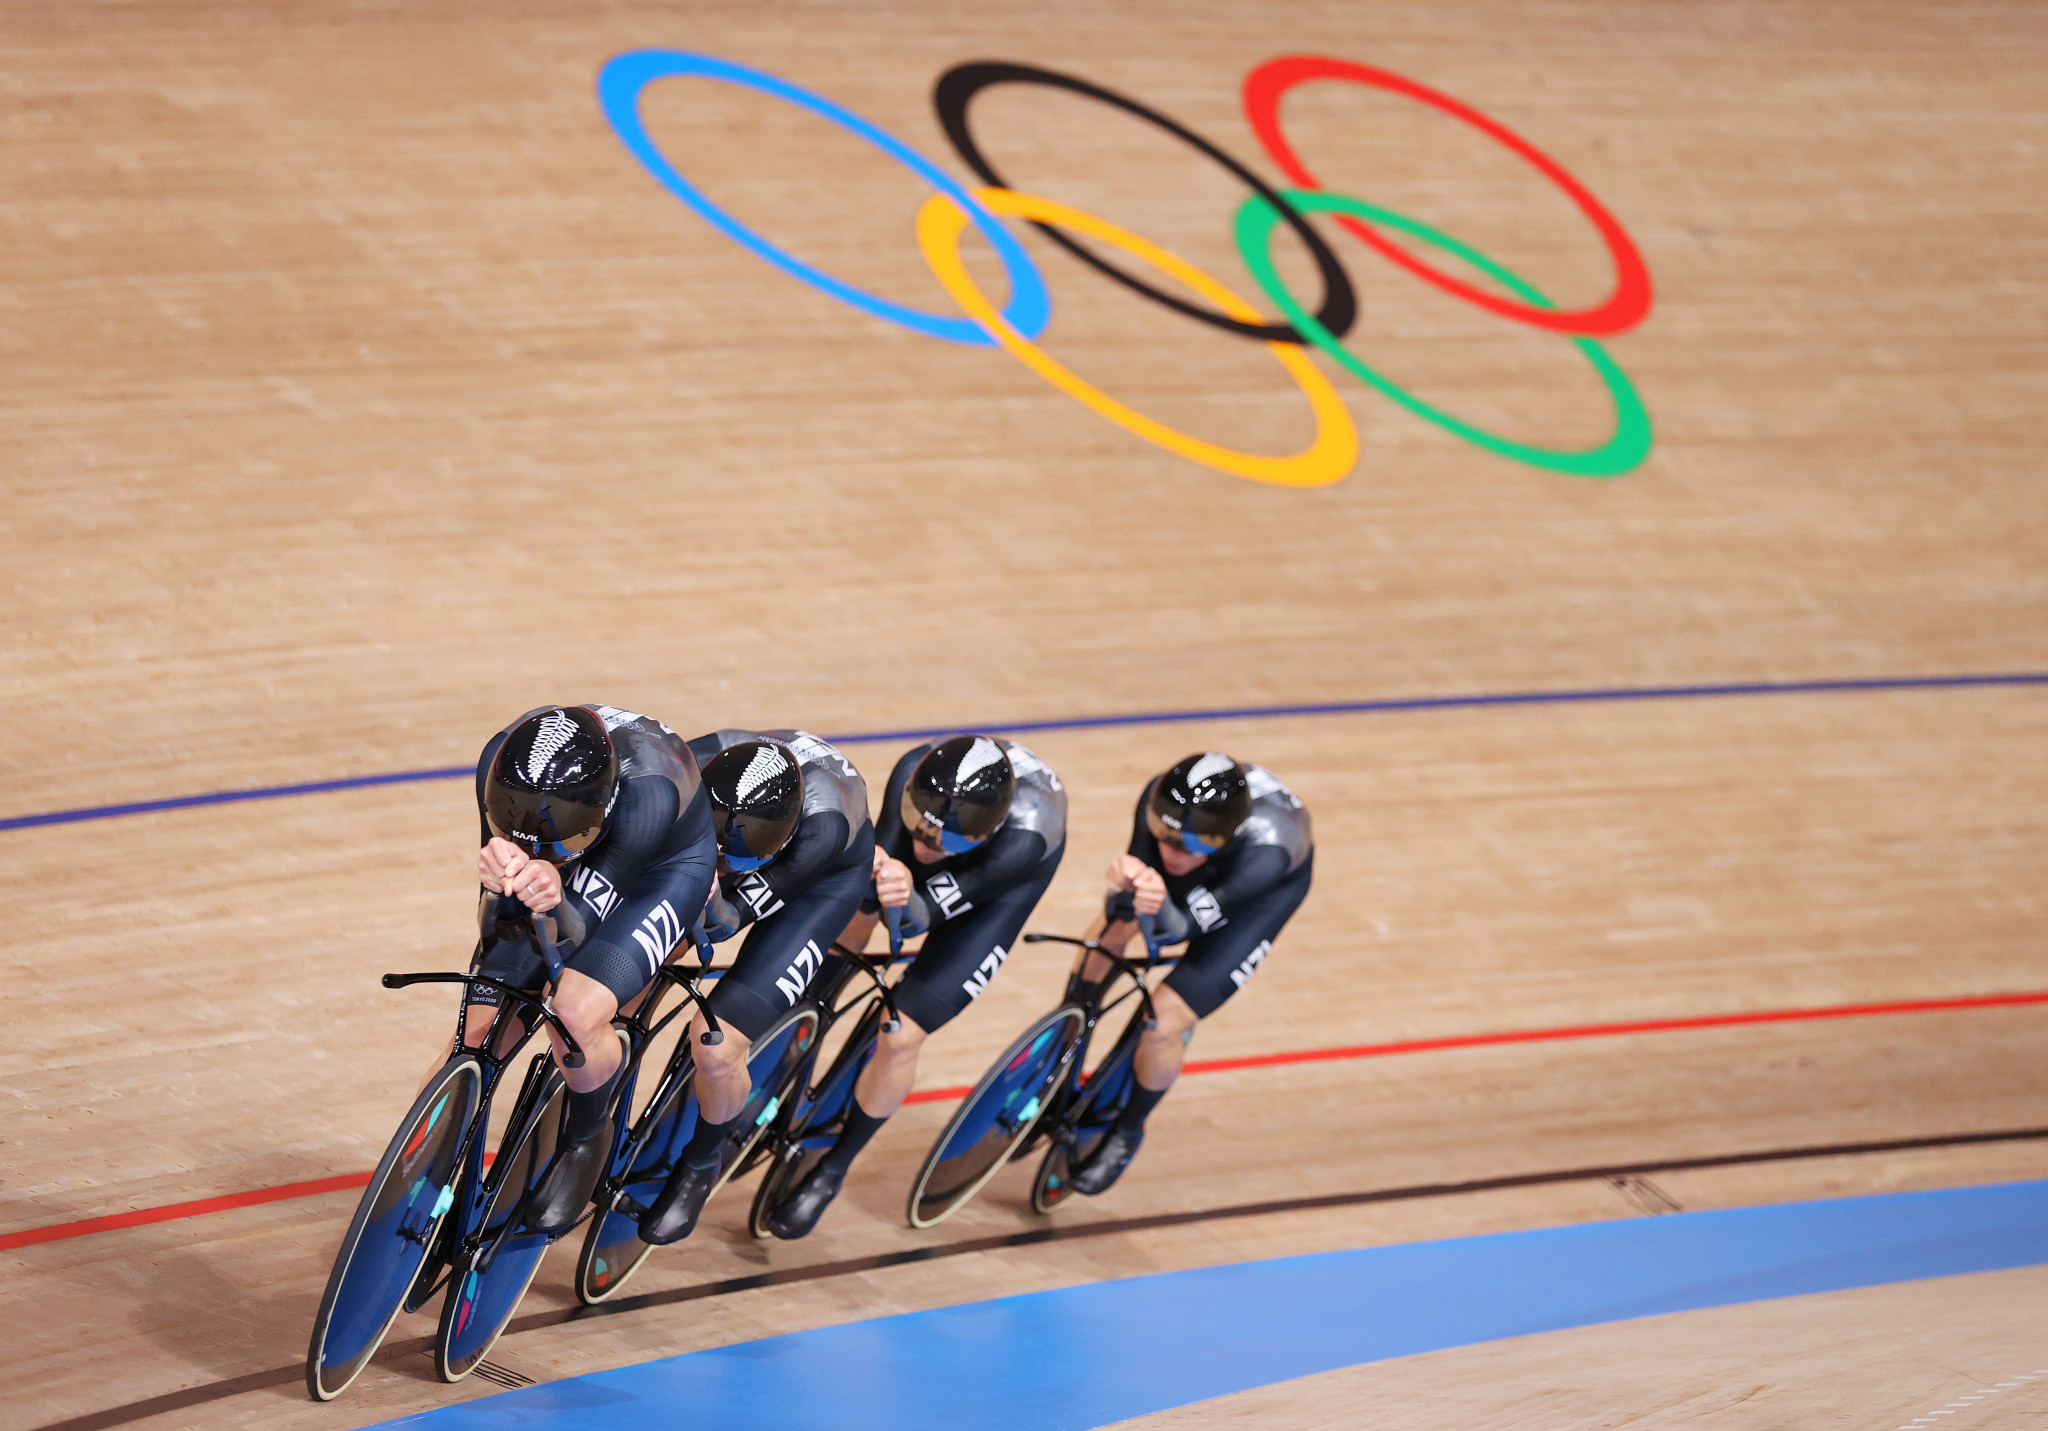 New Zealand was represented by a 15-member track cycling team at Tokyo 2020 ©Getty Images